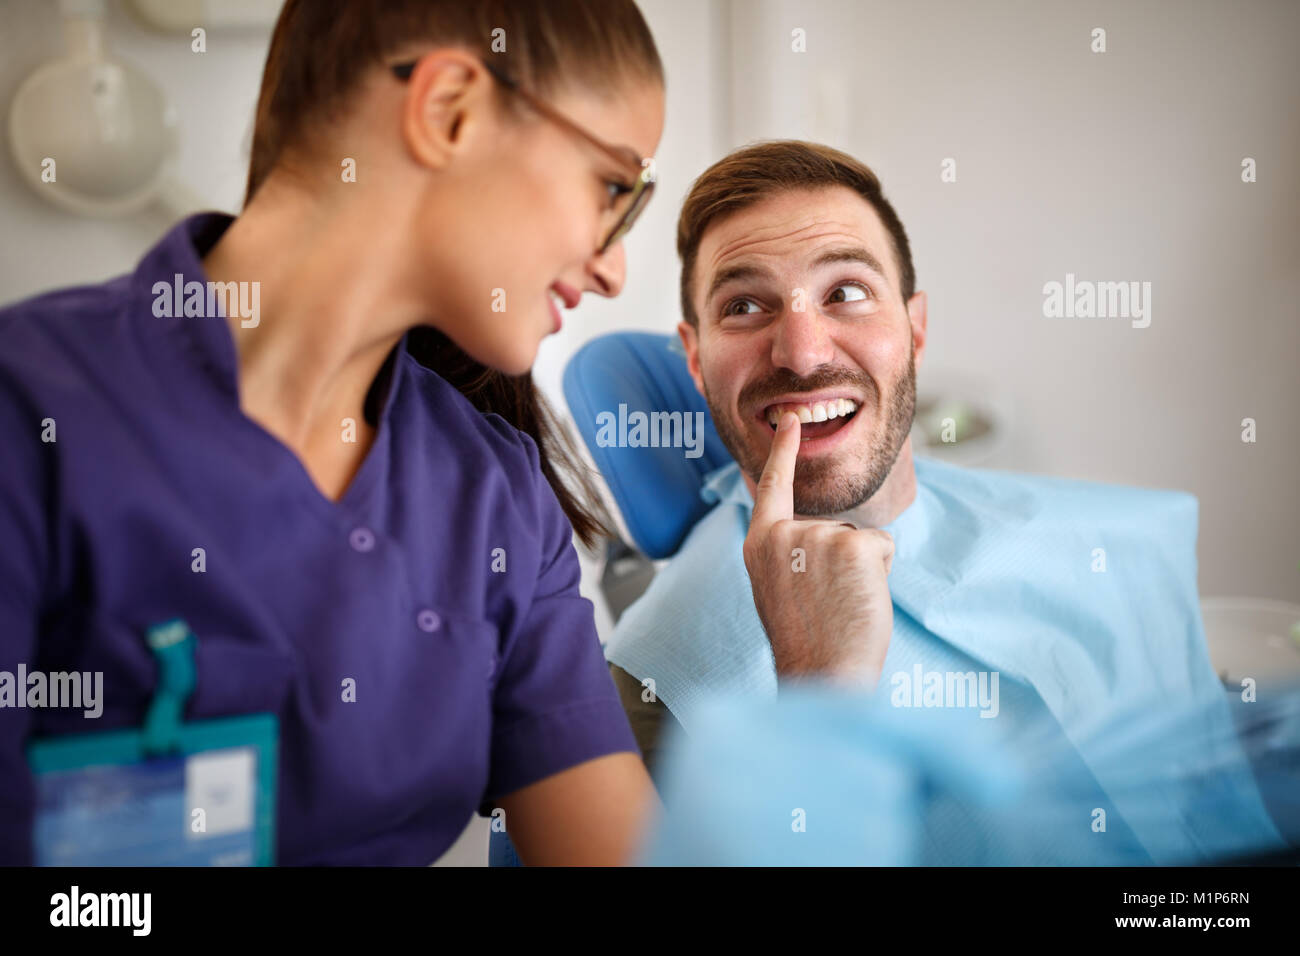 Patient shows problematic tooth to young female dentist Stock Photo